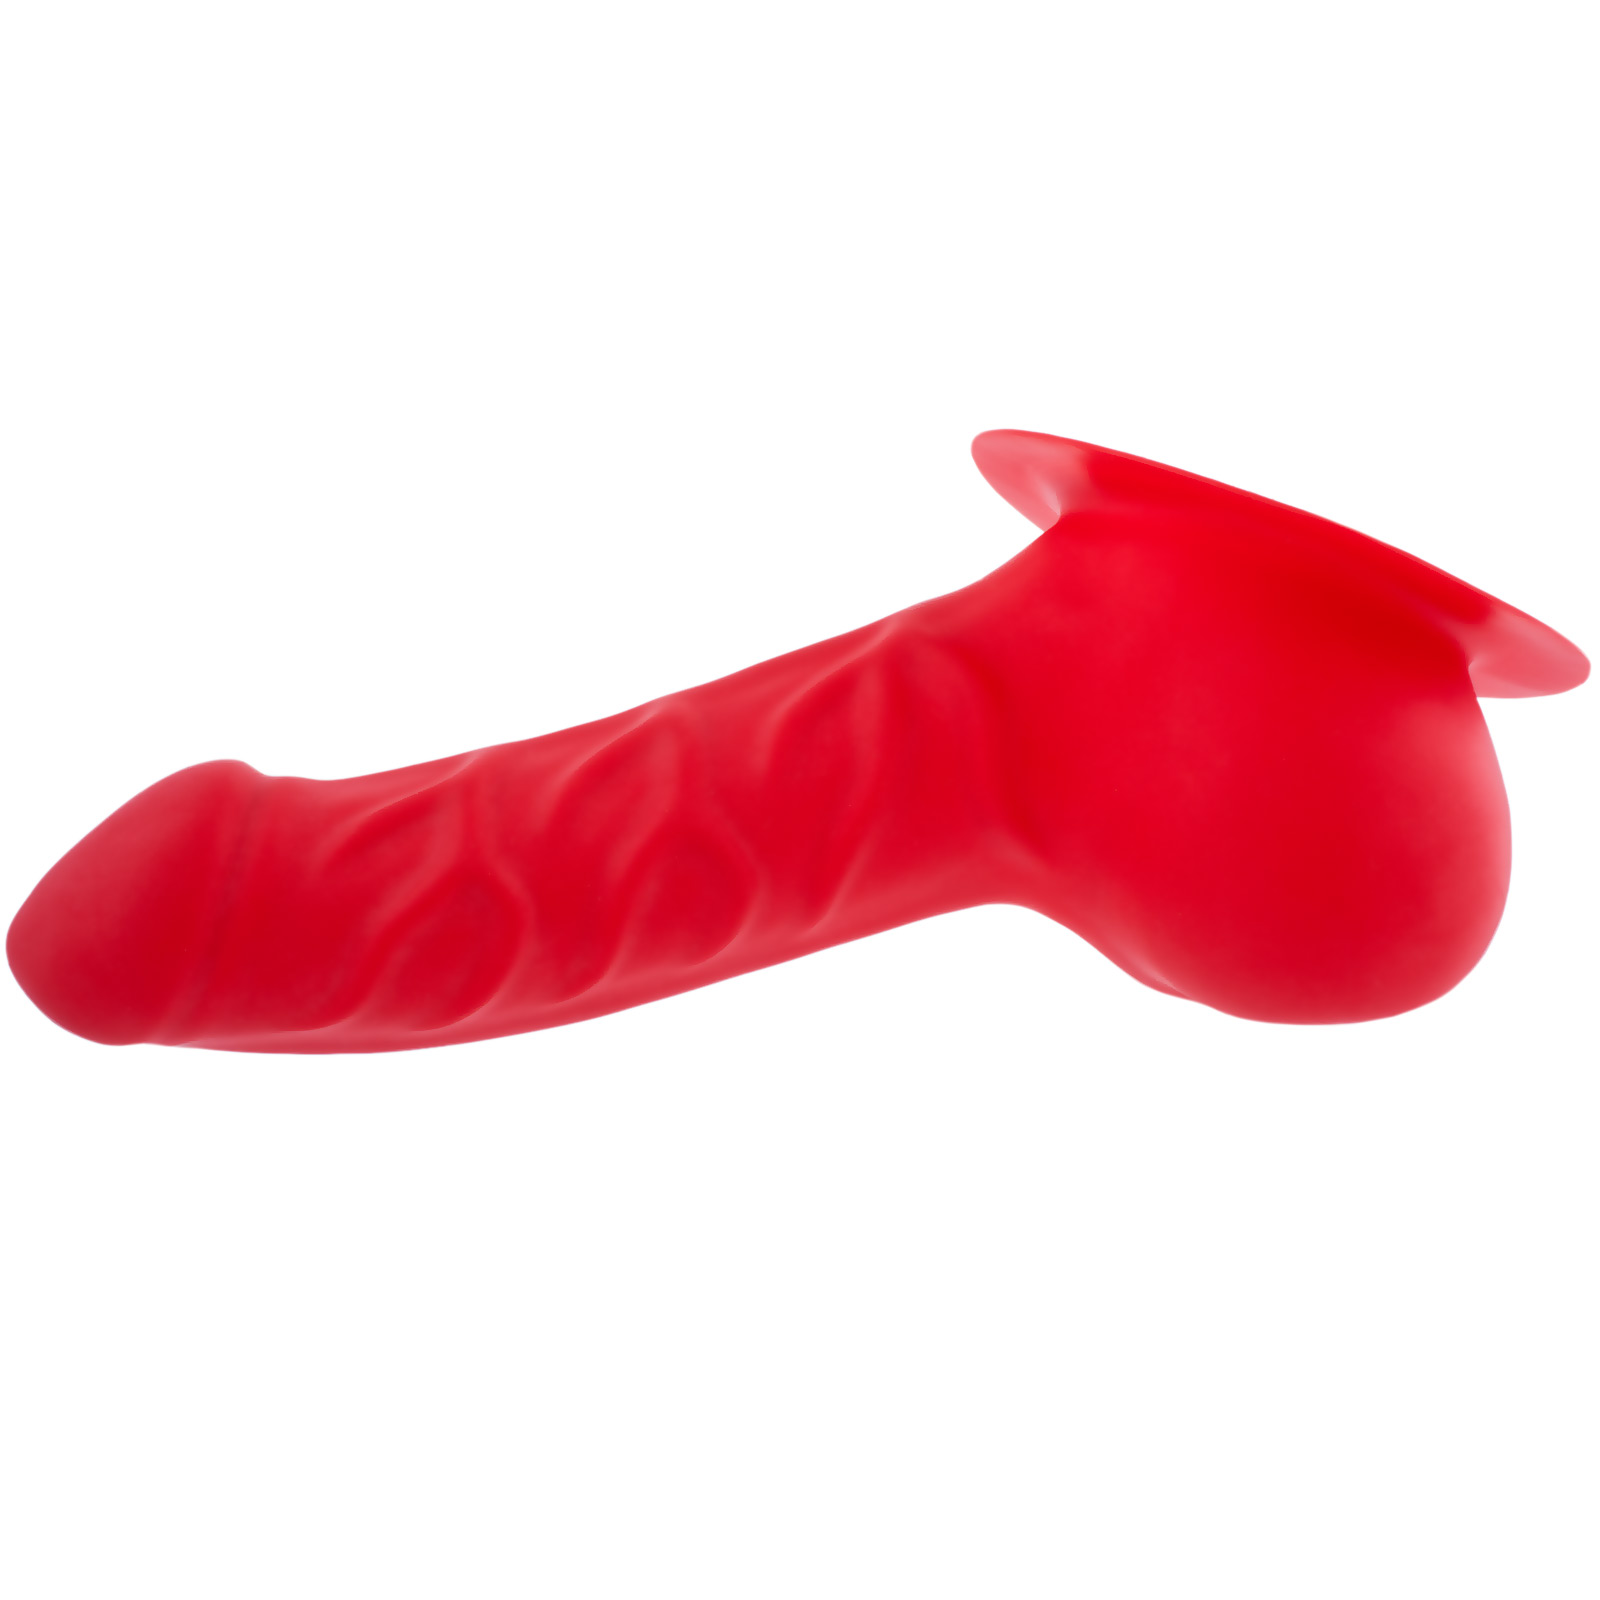 Toylie Latex Penis Sleeve «FRANZ» red, with base plate for sticking to latex clothing